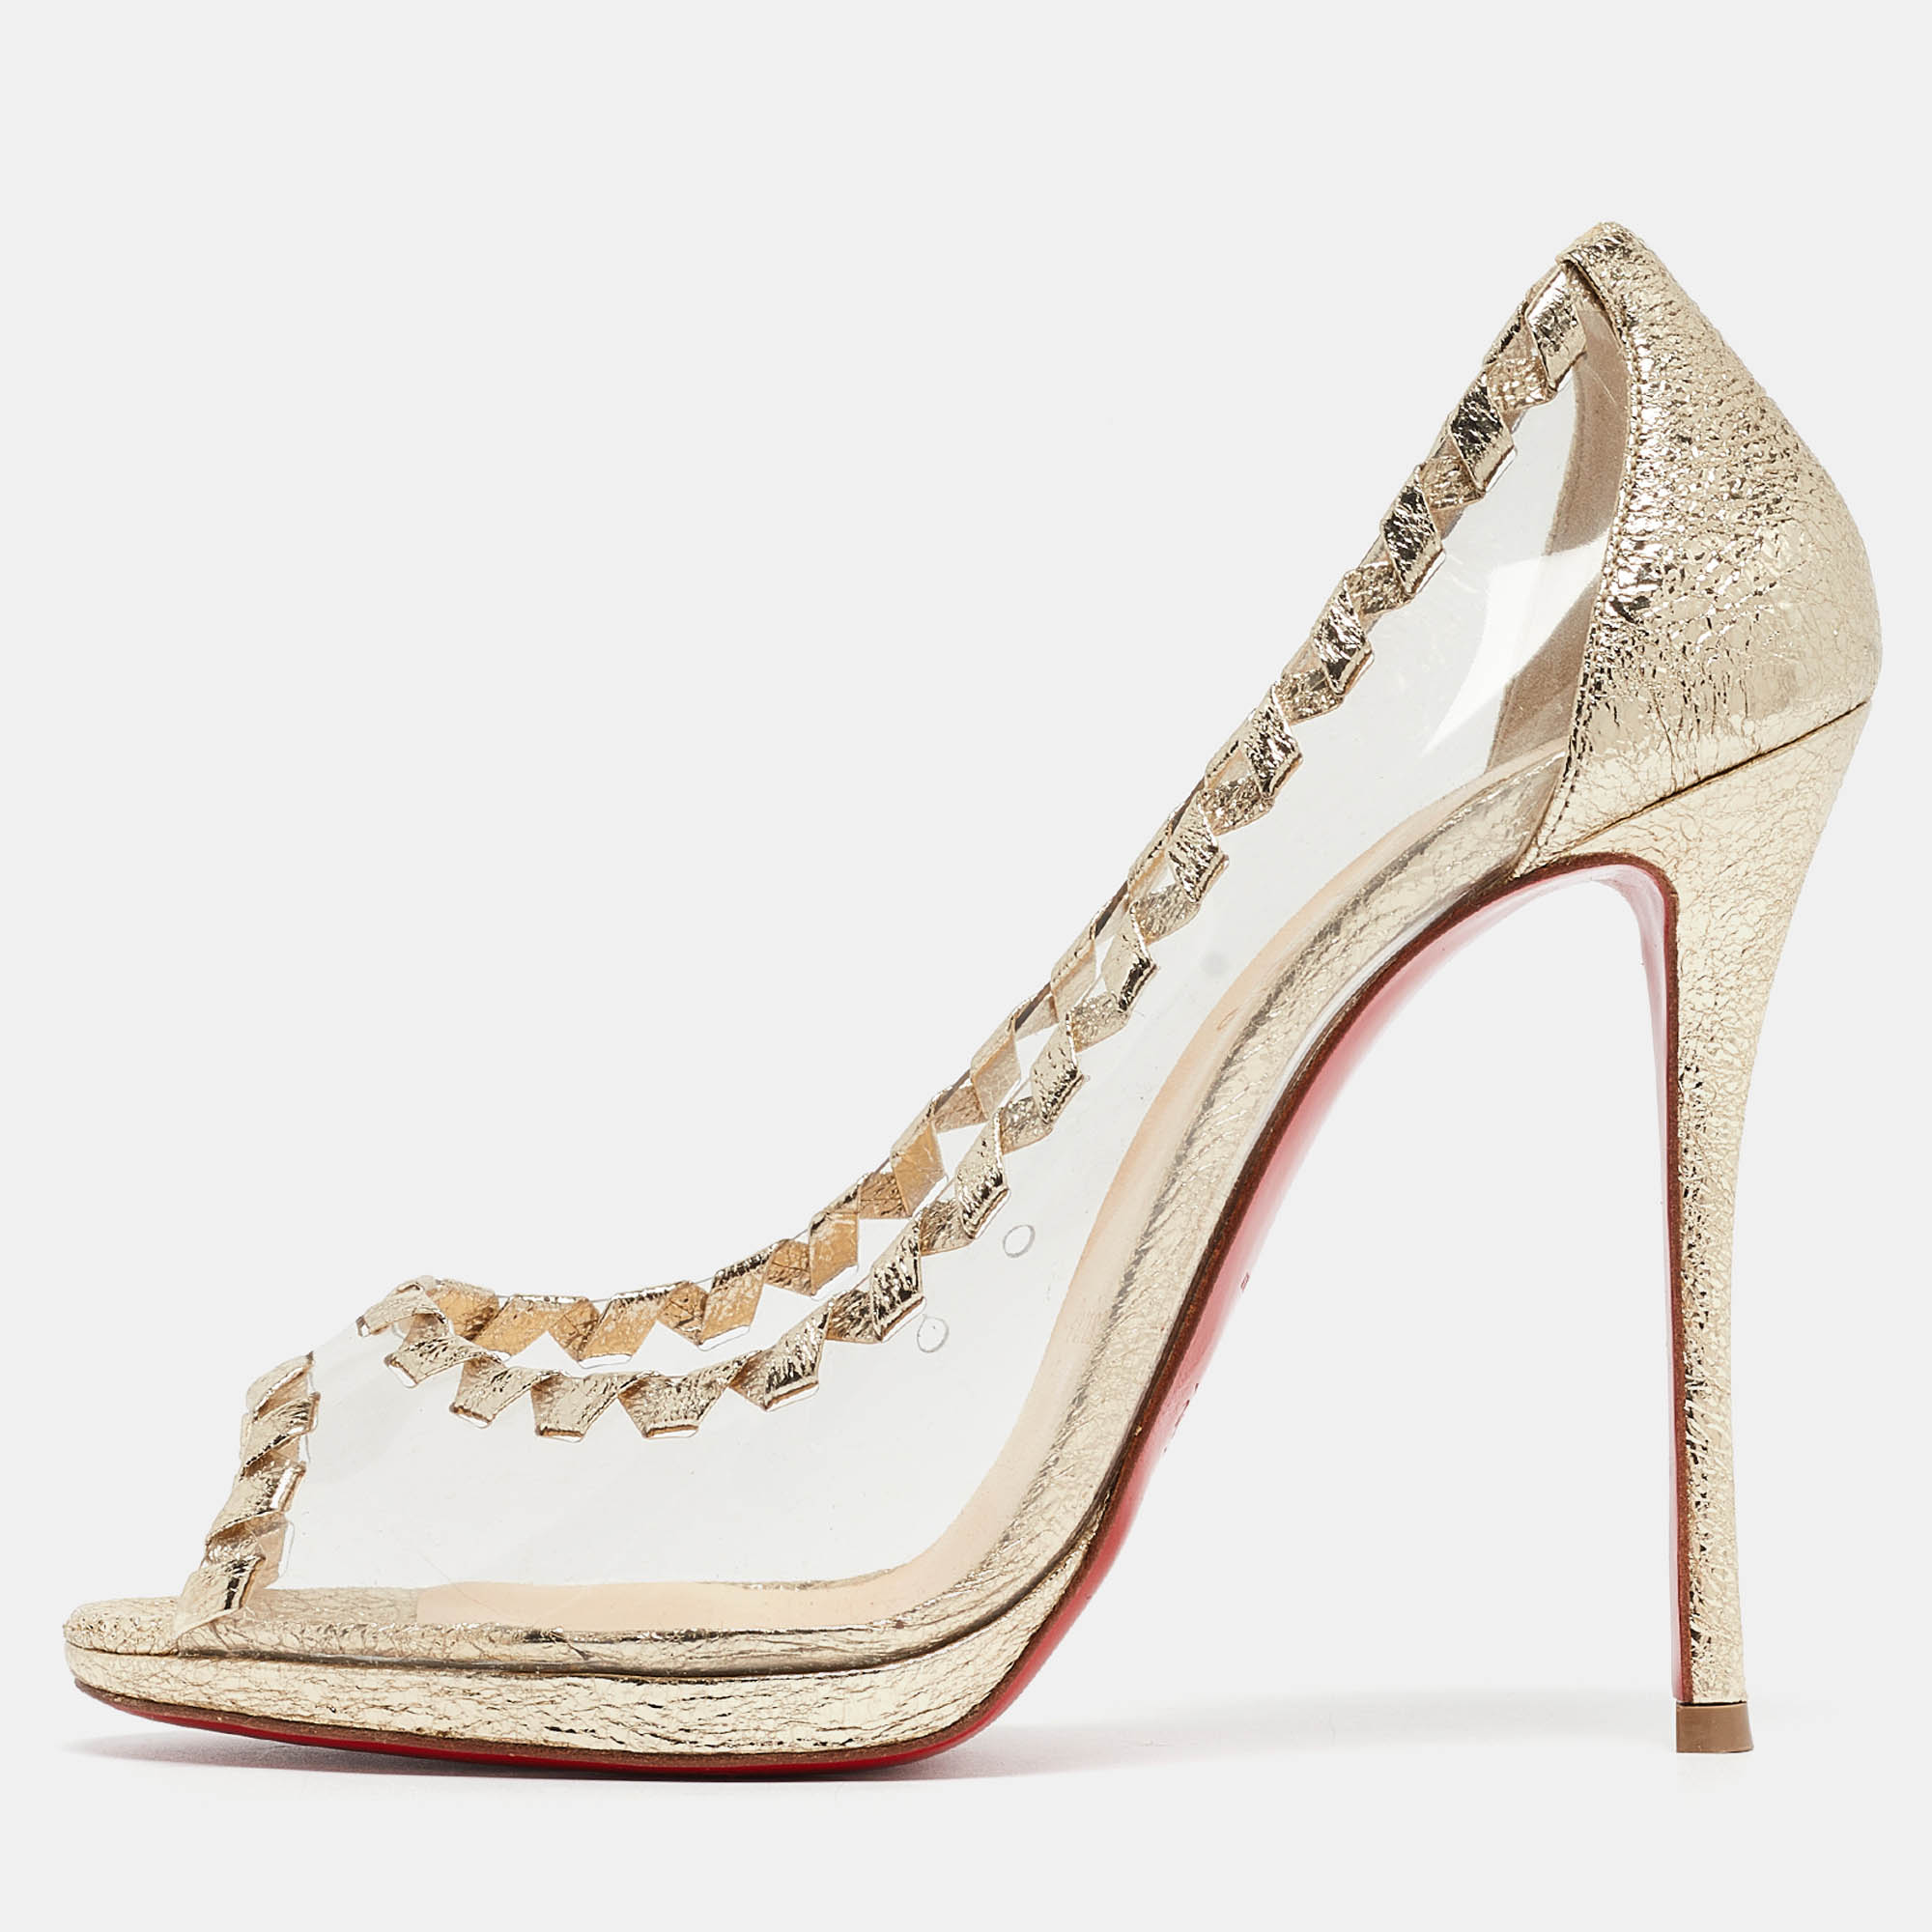 Christian louboutin gold pvc and texture leather pumps size 39